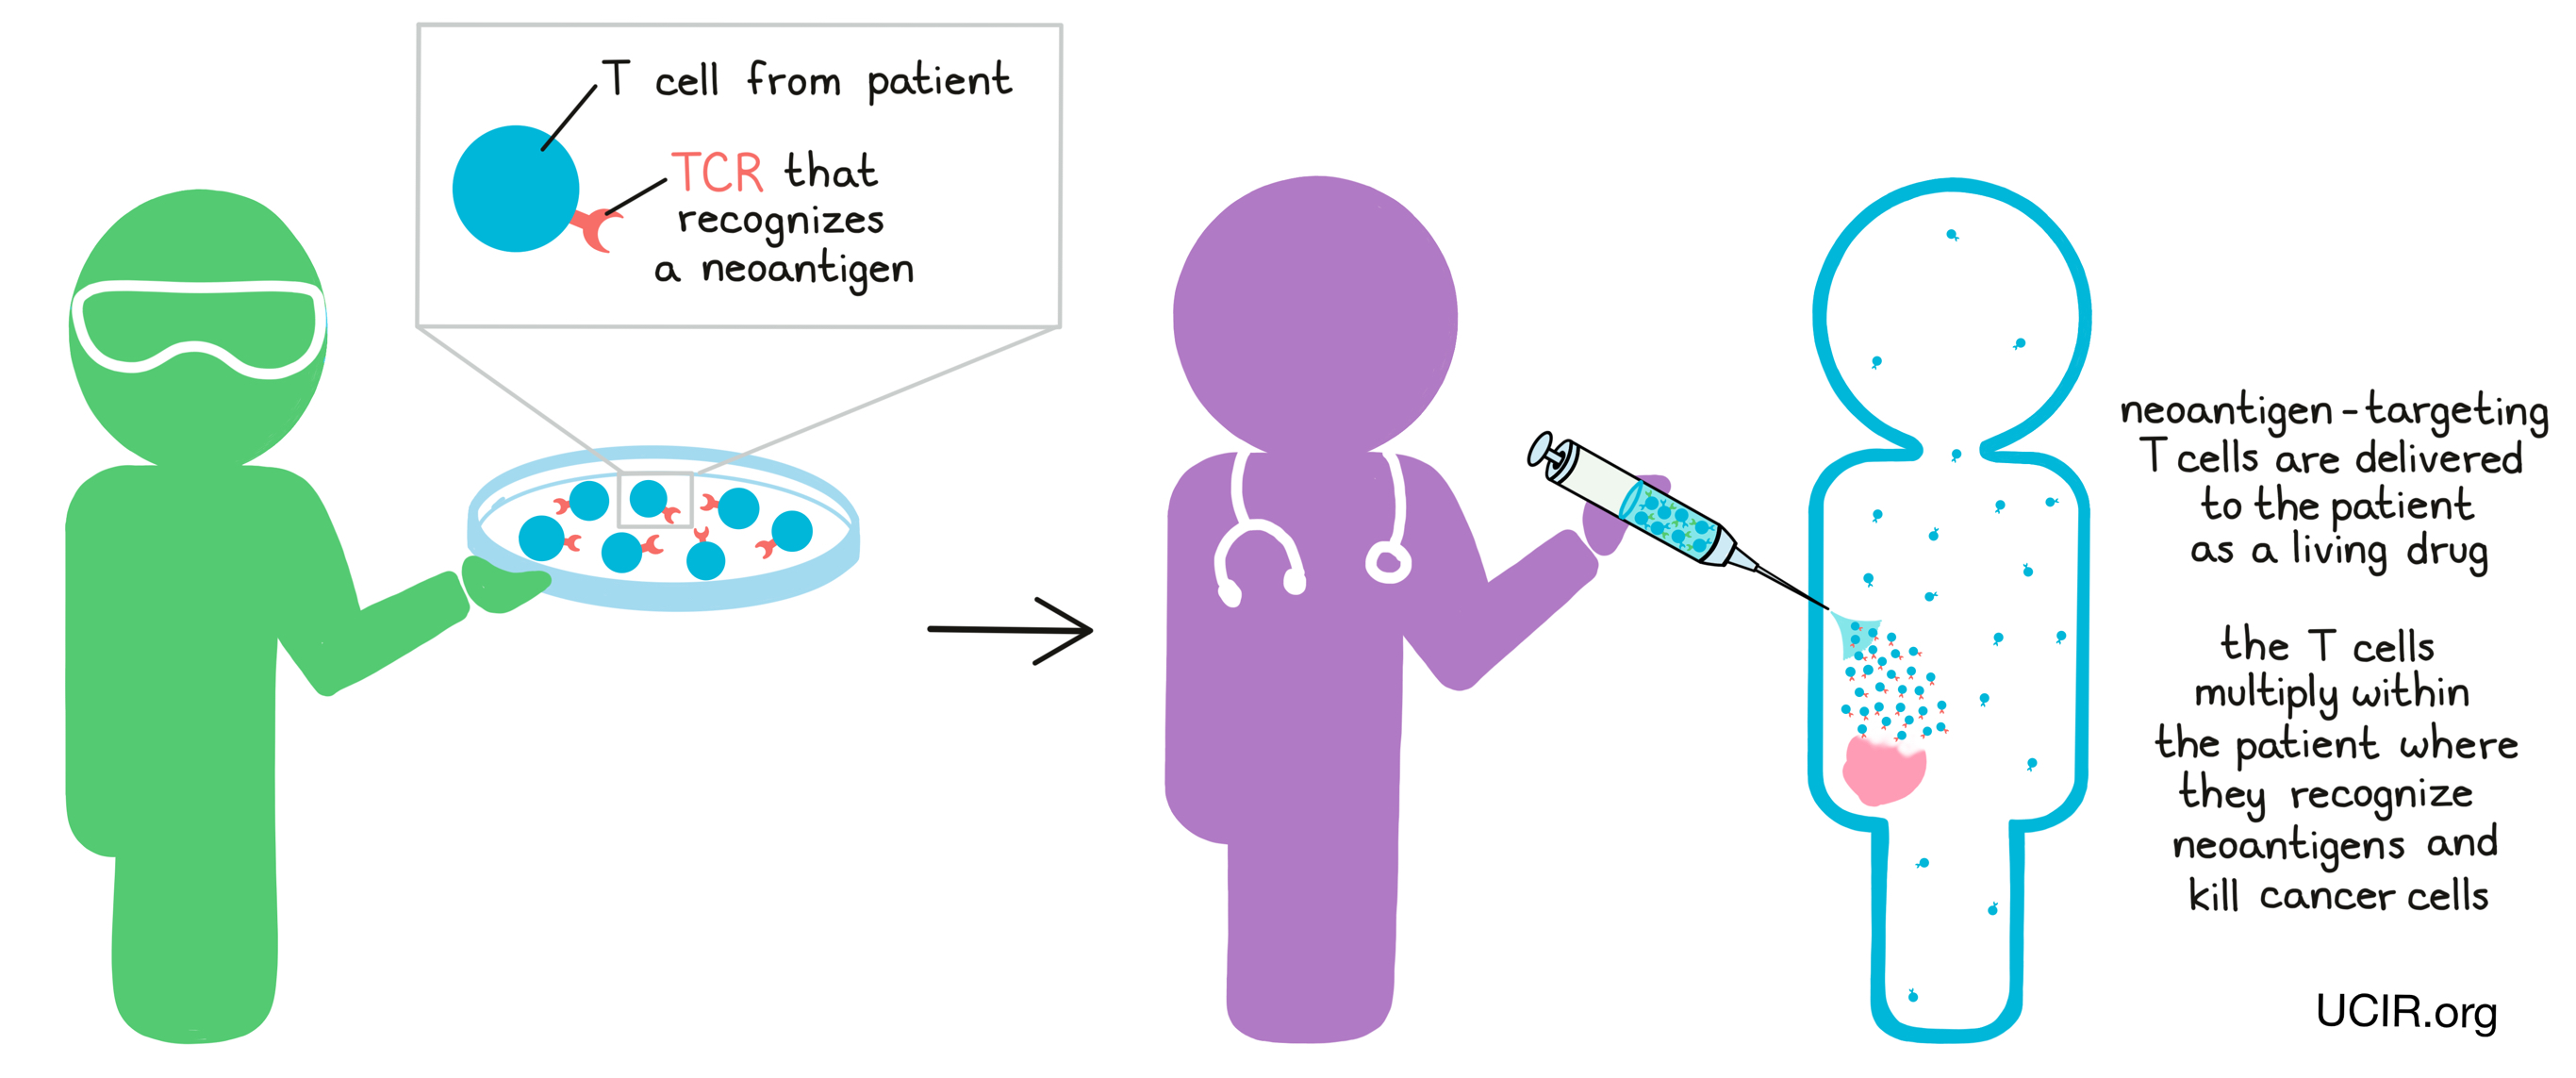 Illustration showing how T cell therapy works with TCR extracted from a patient